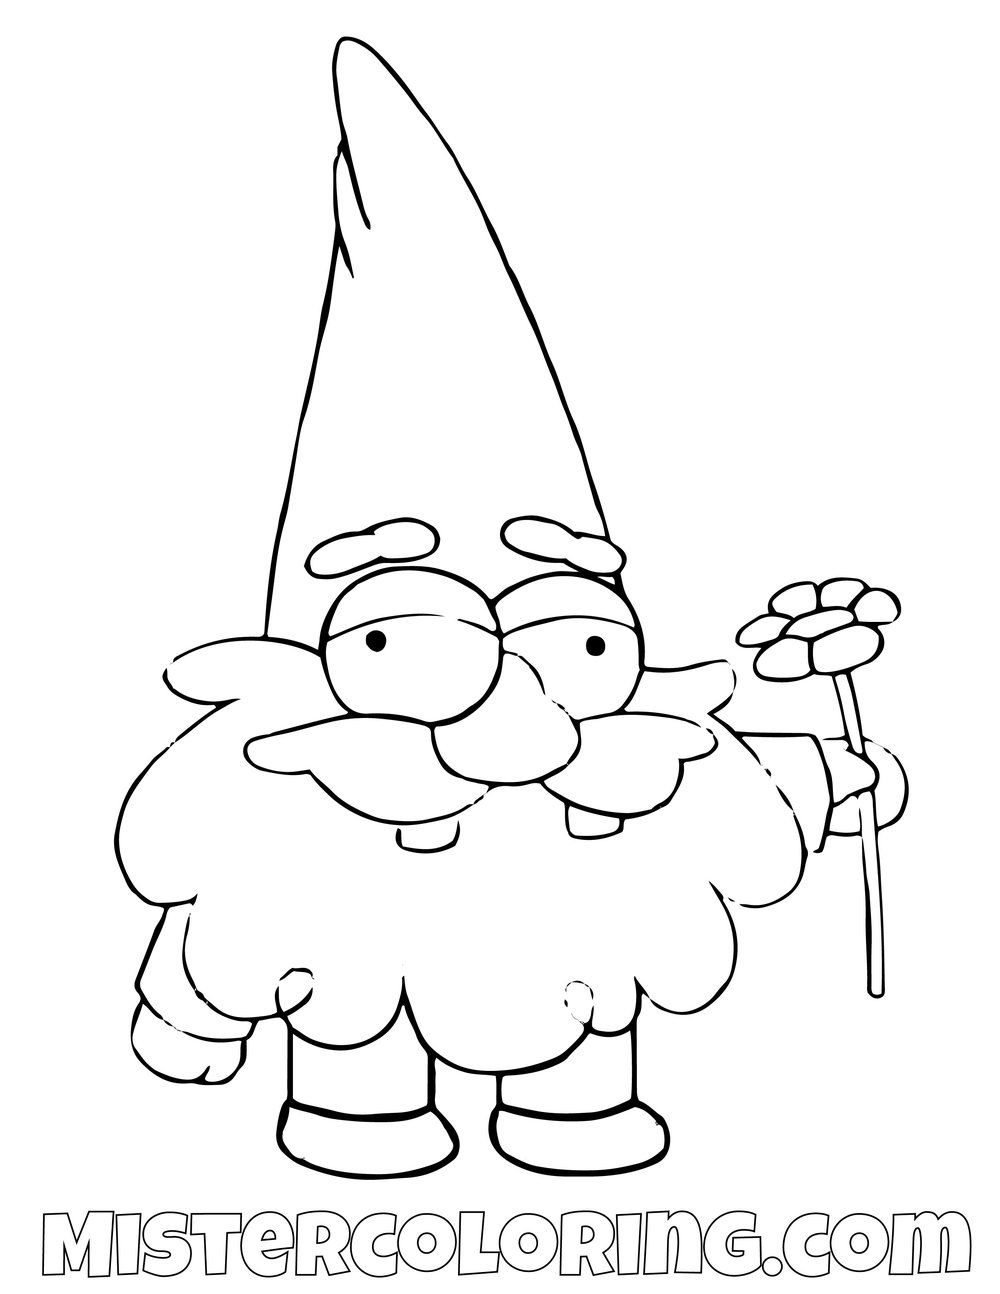 coloring ~ Marvelous Gravity Falls Coloring Pages Gnome With ...